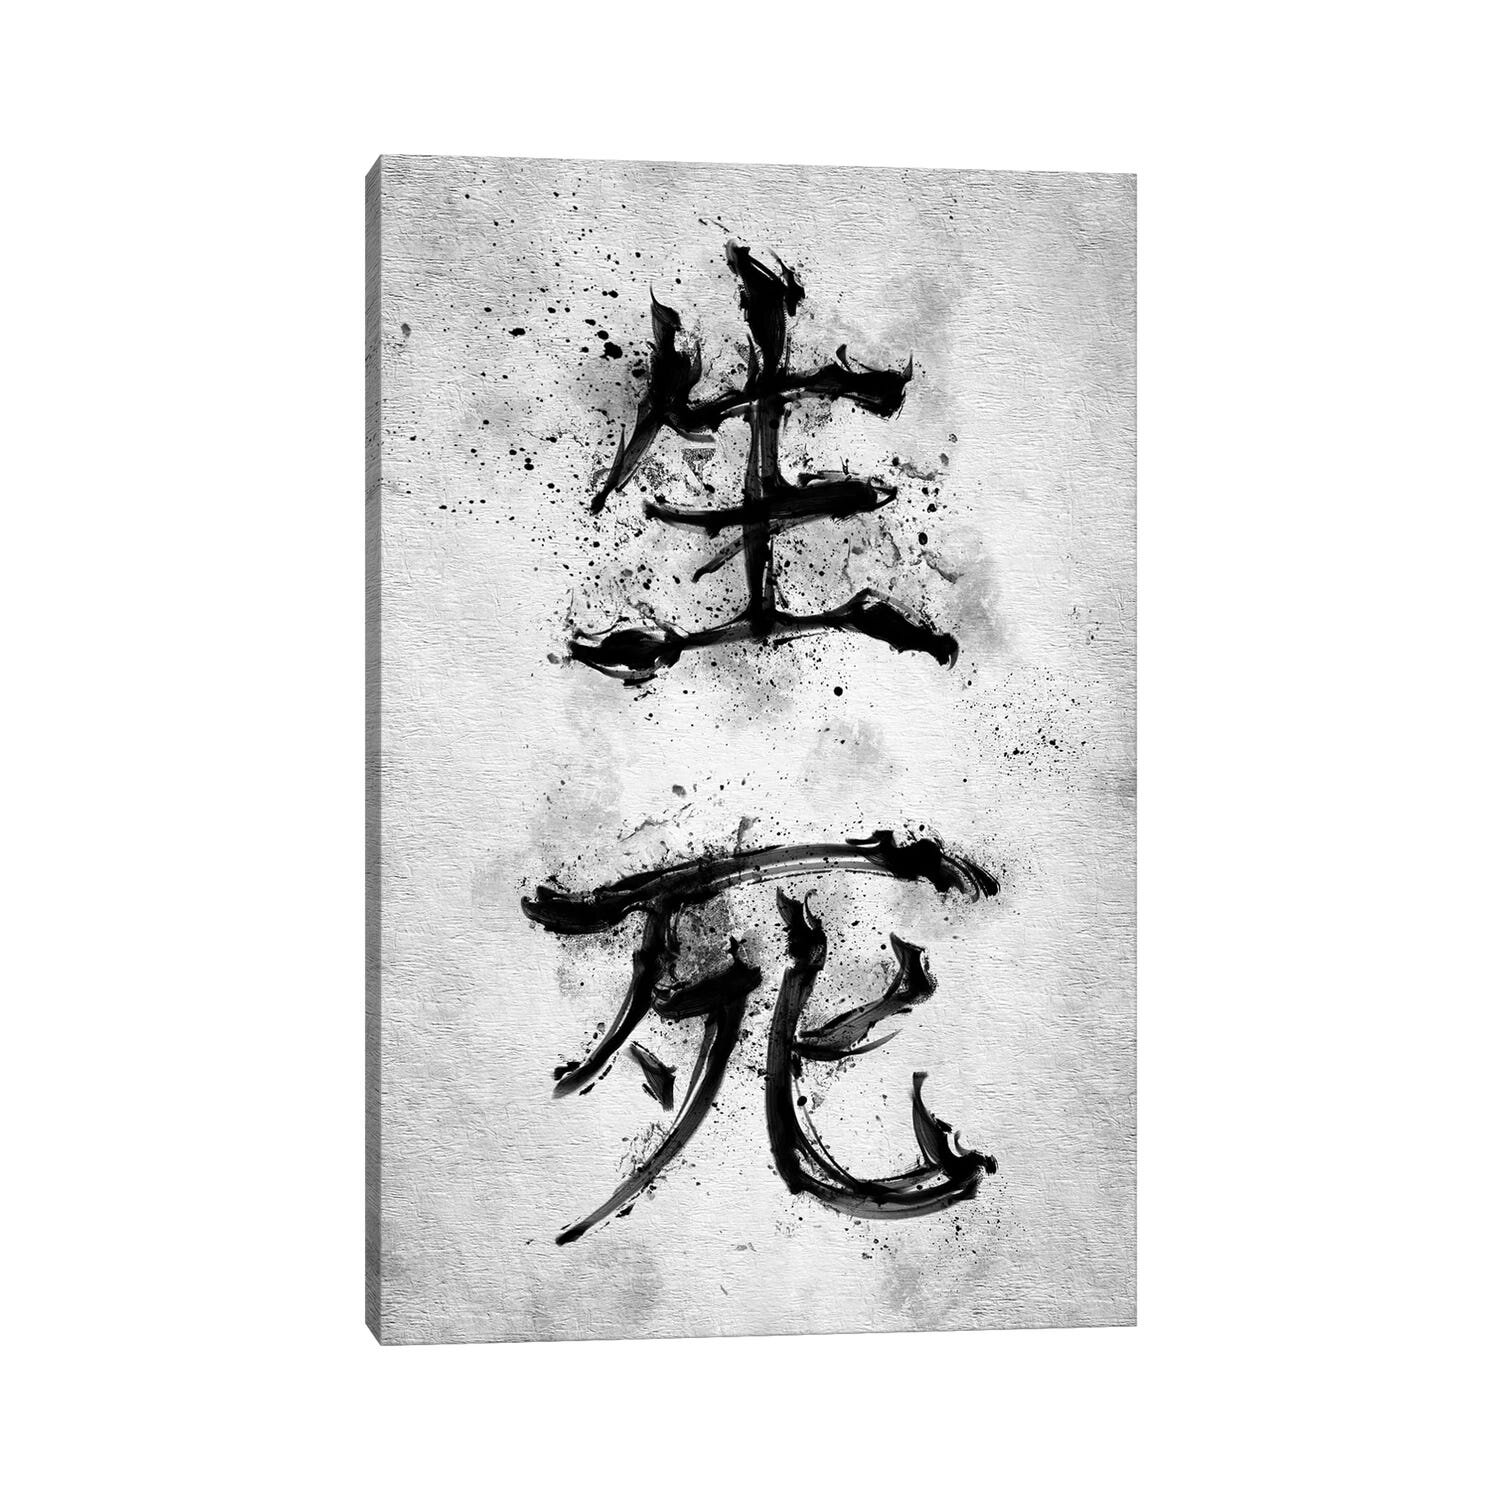 Life and Death Kanji by Nikita Abakumov - Wrapped Canvas Textual Art Print East Urban Home Size: 18 H x 12 W x 1.5 D